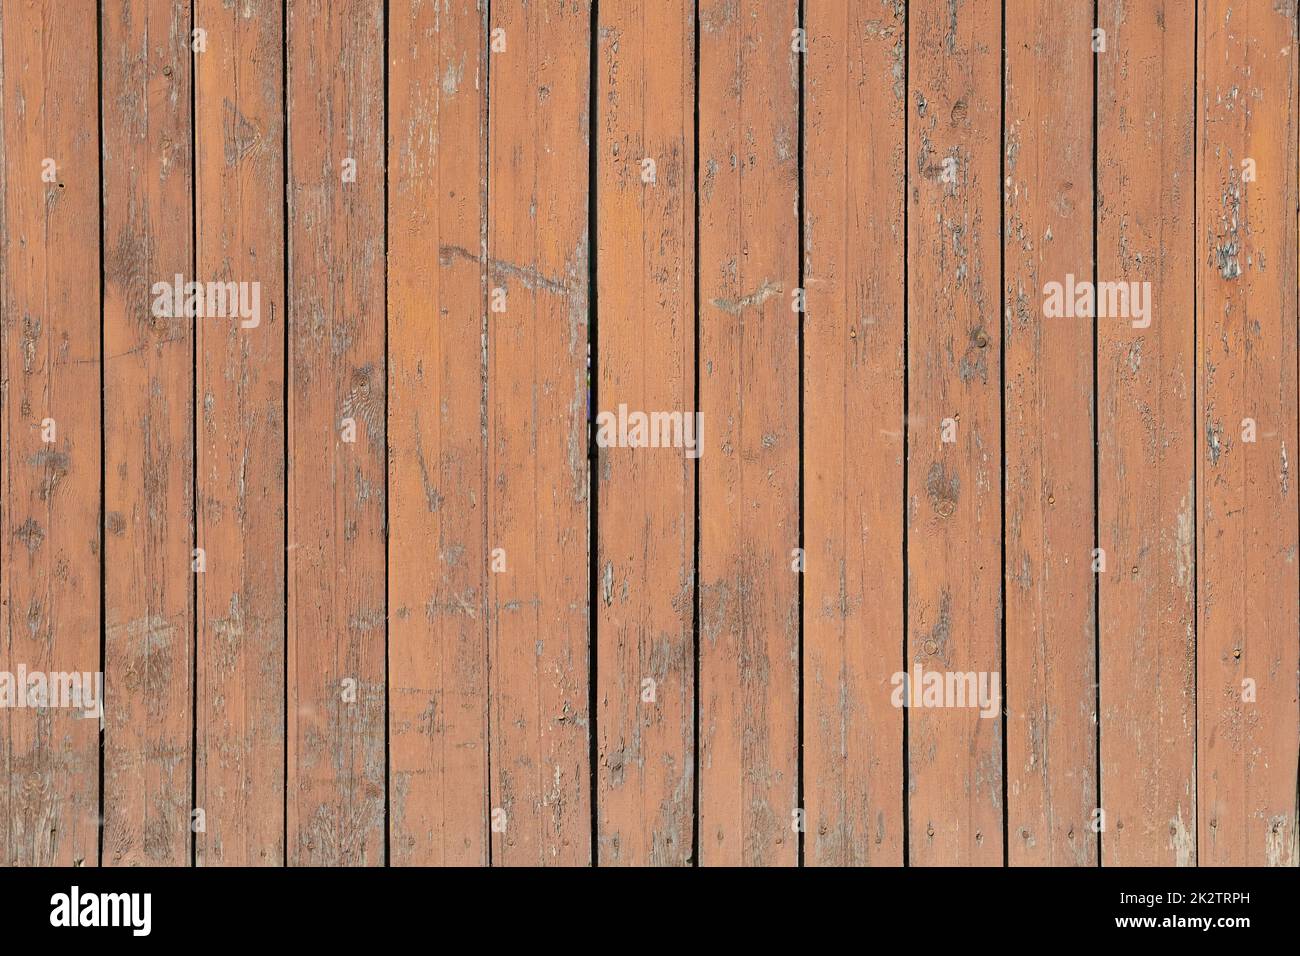 A background of aged wooden plank wall Stock Photo